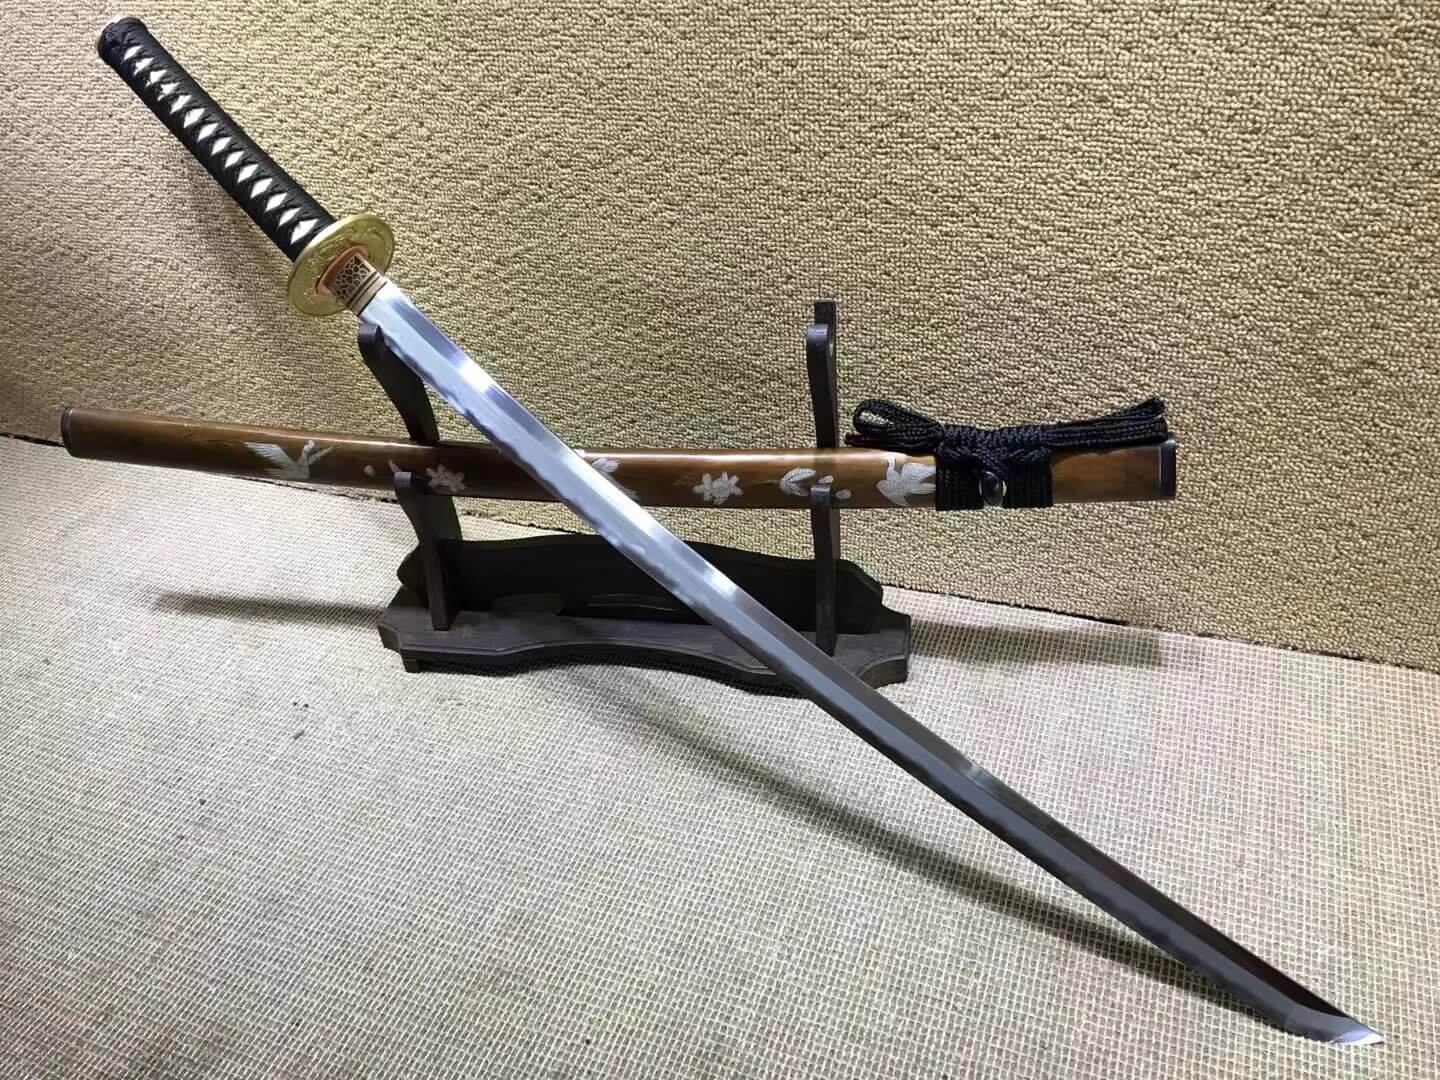 Katana(Damascus steel burn blade,Brass scabbard and fitted)Length 40" - Chinese sword shop